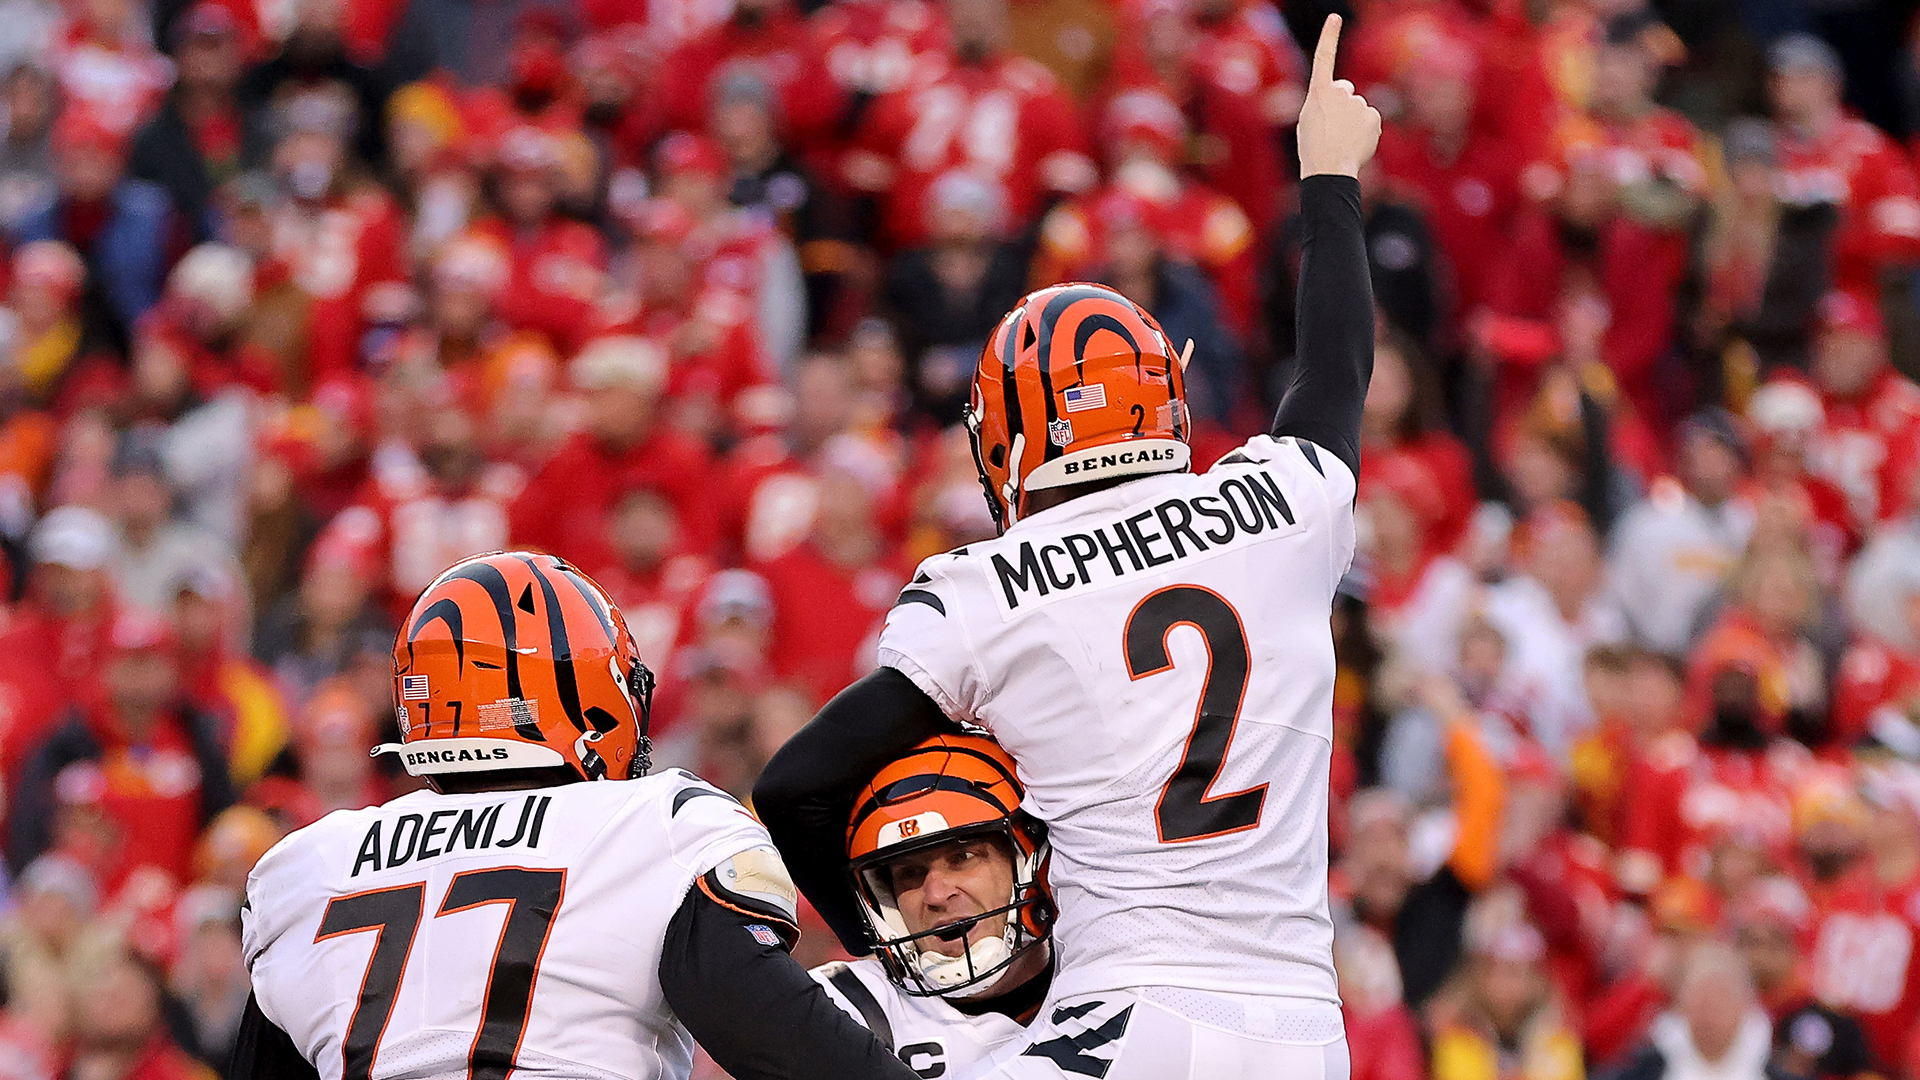 Bengals rally from 21-3 deficit and knock off Chiefs in overtime